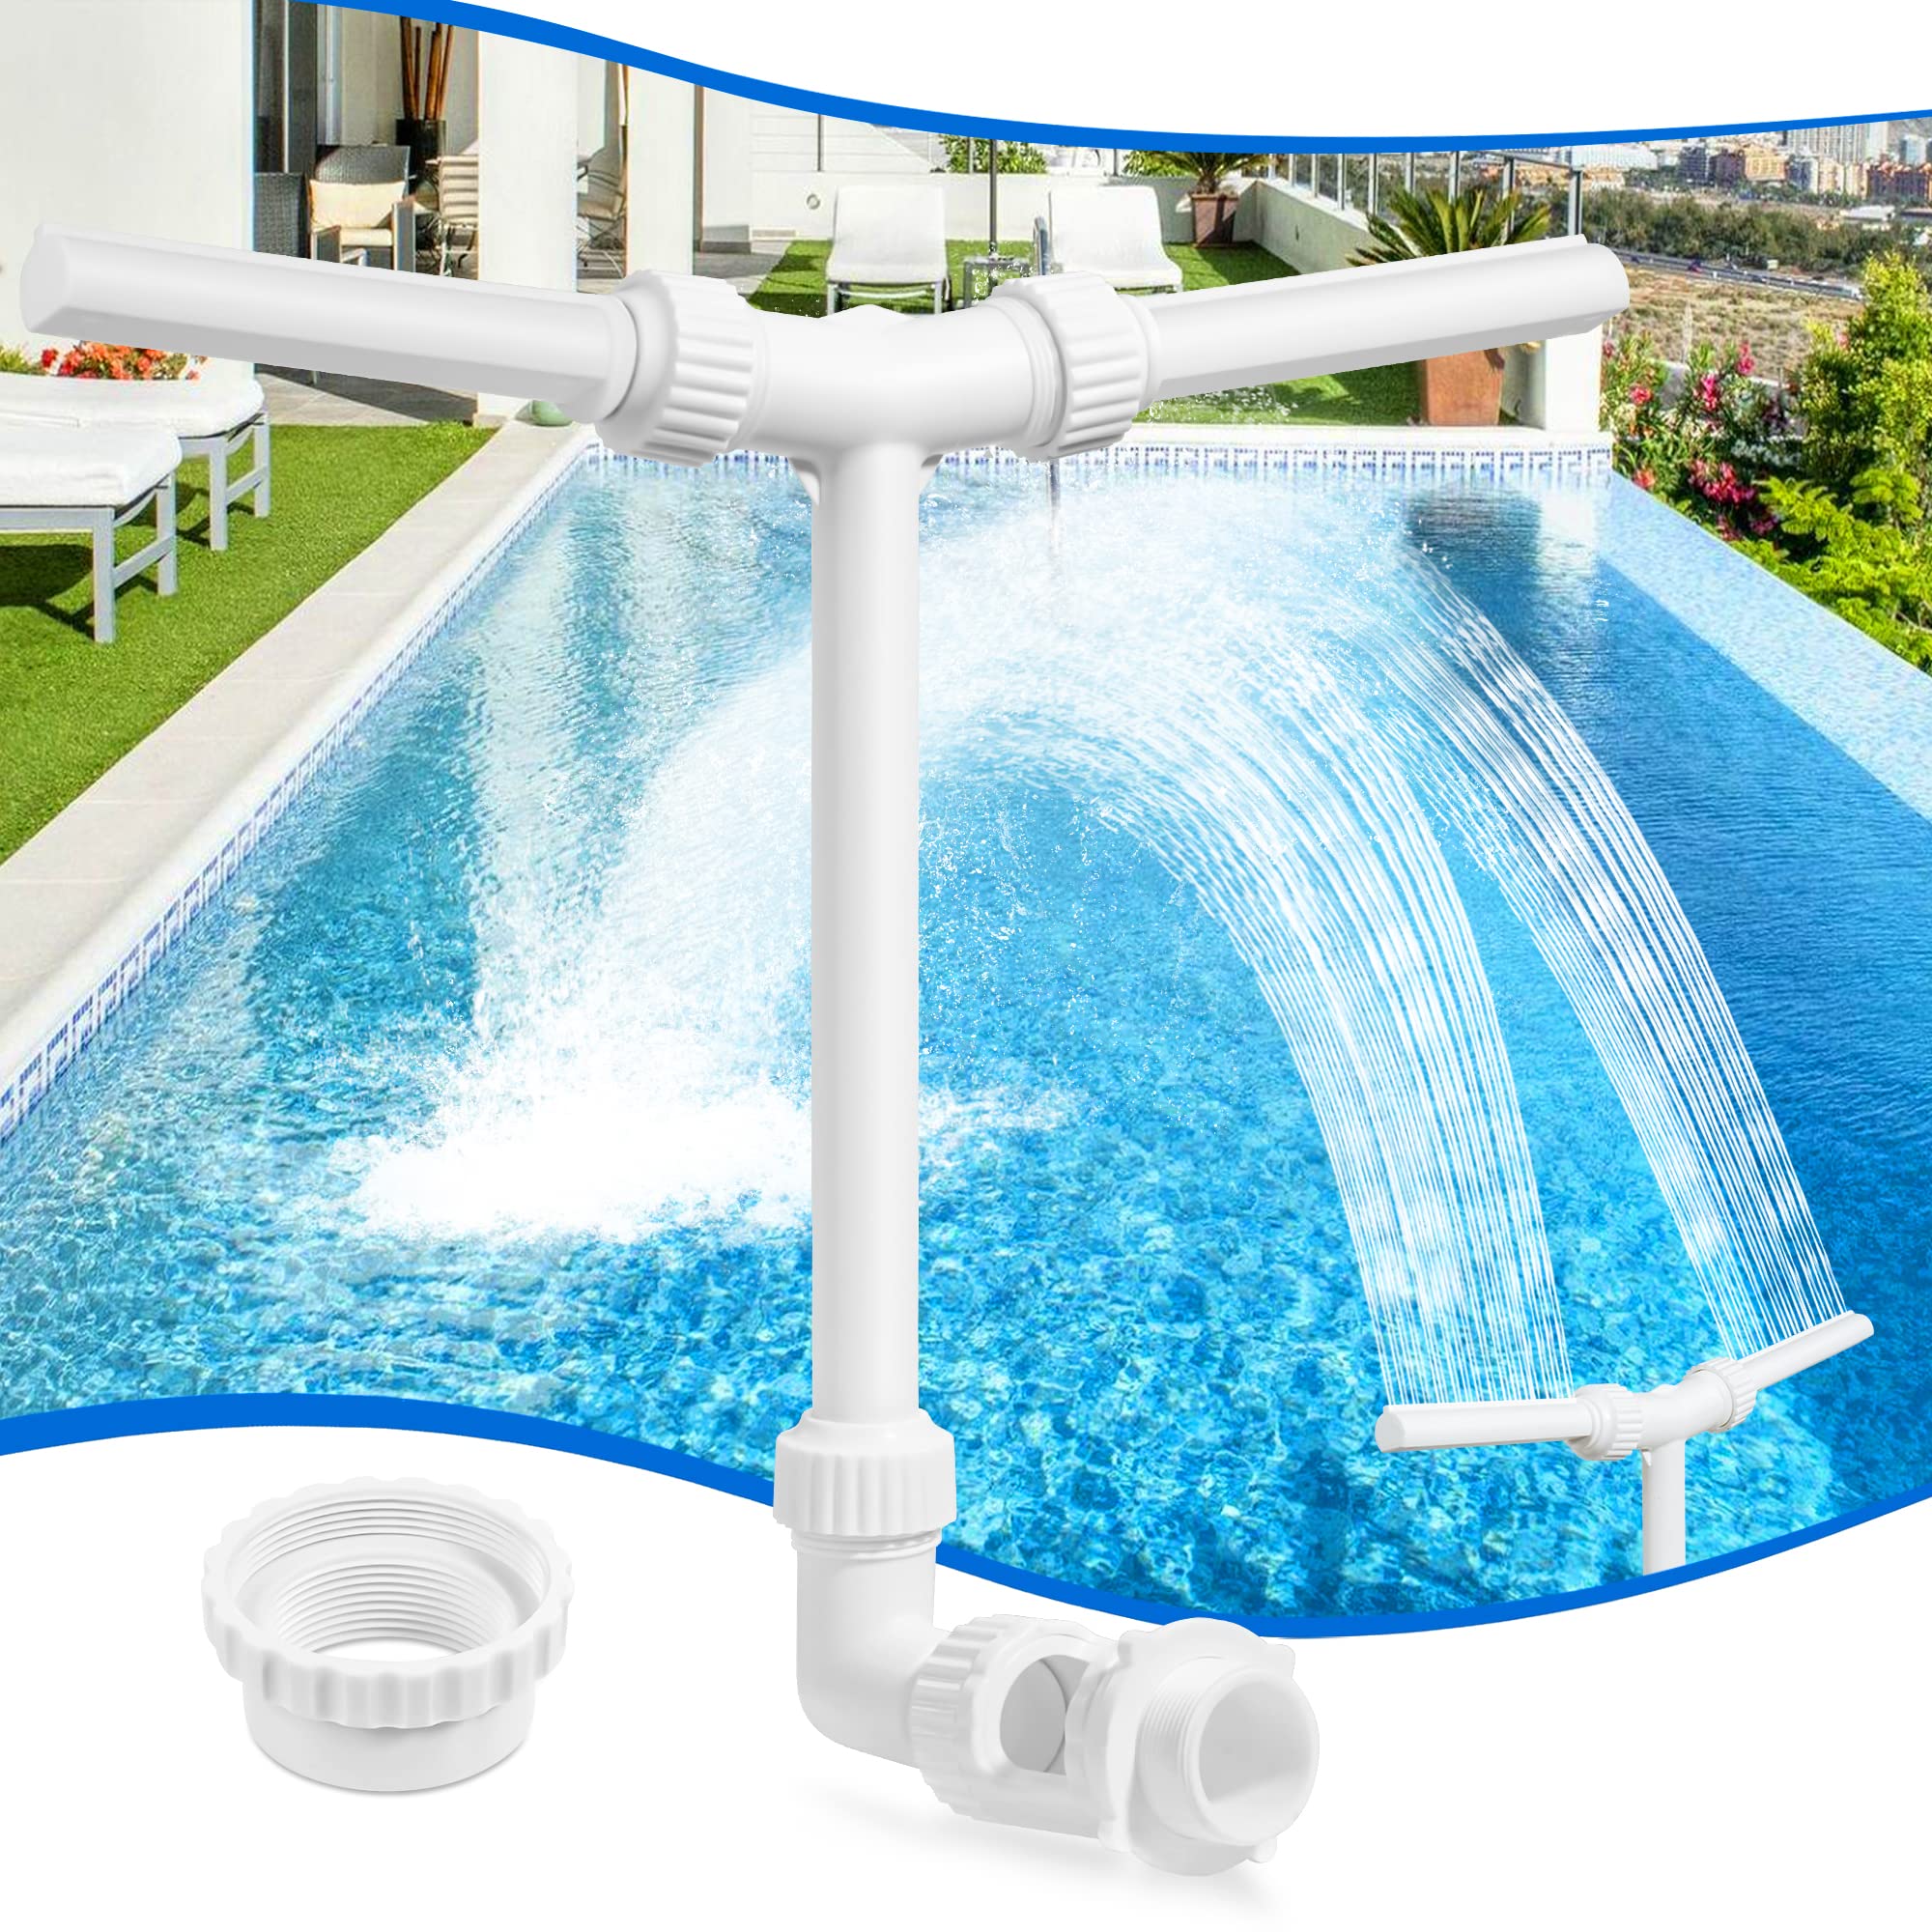 PoolHour Pool Waterfall Fountain Swimming Pool Accessories 2 Adjustable Fountain Heads Water Sprinkler with Adapter Waterfall Sprays Pool Decorative Sprayer Spout for Inground Indoor Outdoor Pools